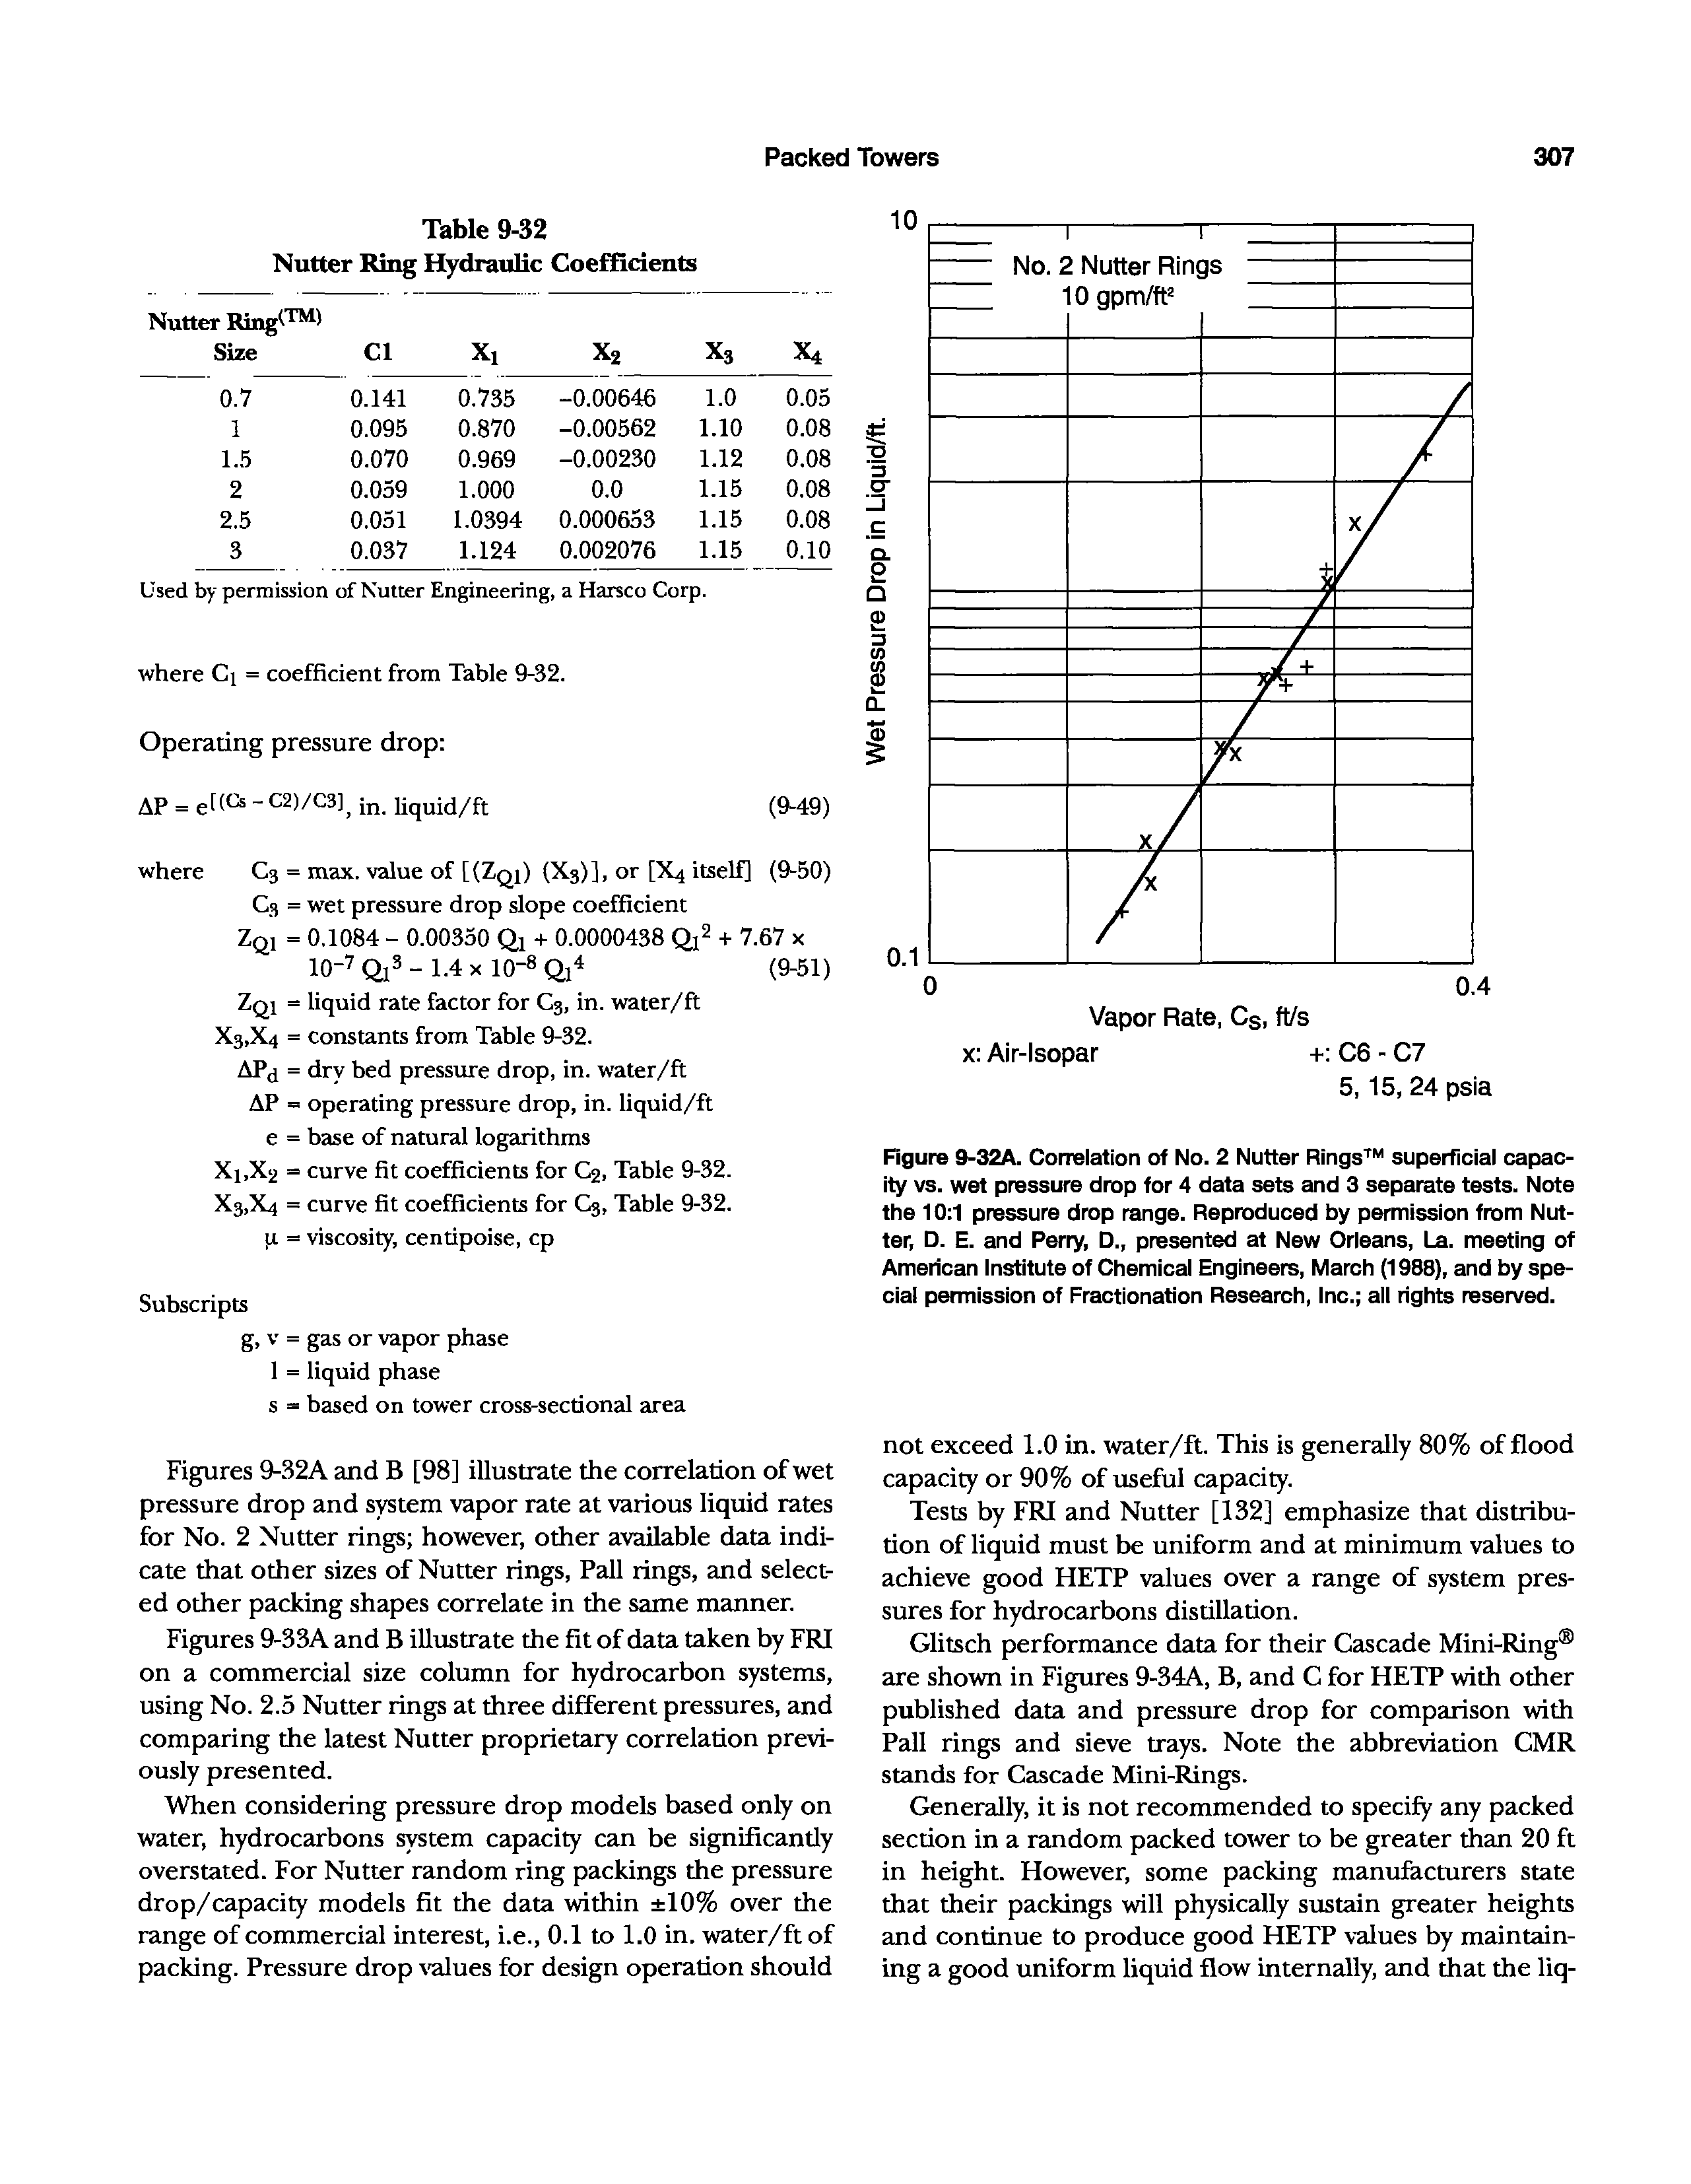 Figure 9-32A. Correlation of No. 2 Nutter Rings superficial capacity vs. wet pressure drop for 4 data sets and 3 separate tests. Note the 10 1 pressure drop range. Reproduced by permission from Nutter, D. E. and Perry, D., presented at New Orleans, La. meeting of American Institute of Chemical Engineers, March (1988), and by special permission of Fractionation Research, Inc. all rights reserved.